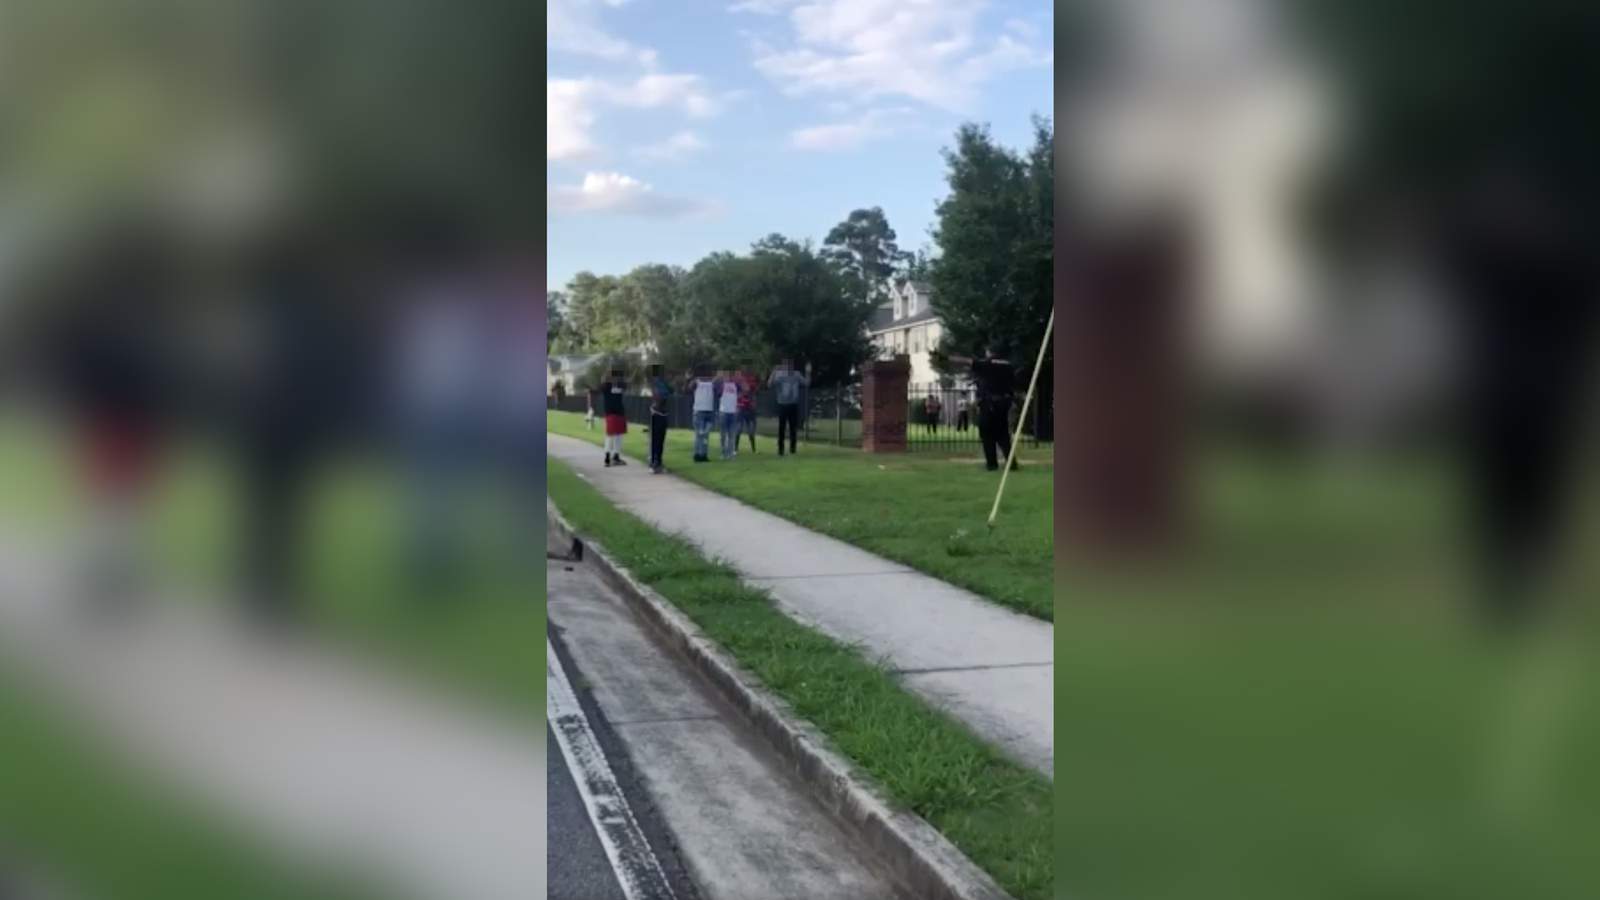 A Georgia cop pointed a gun at a group of teens. Neighbors stepped in to protect them